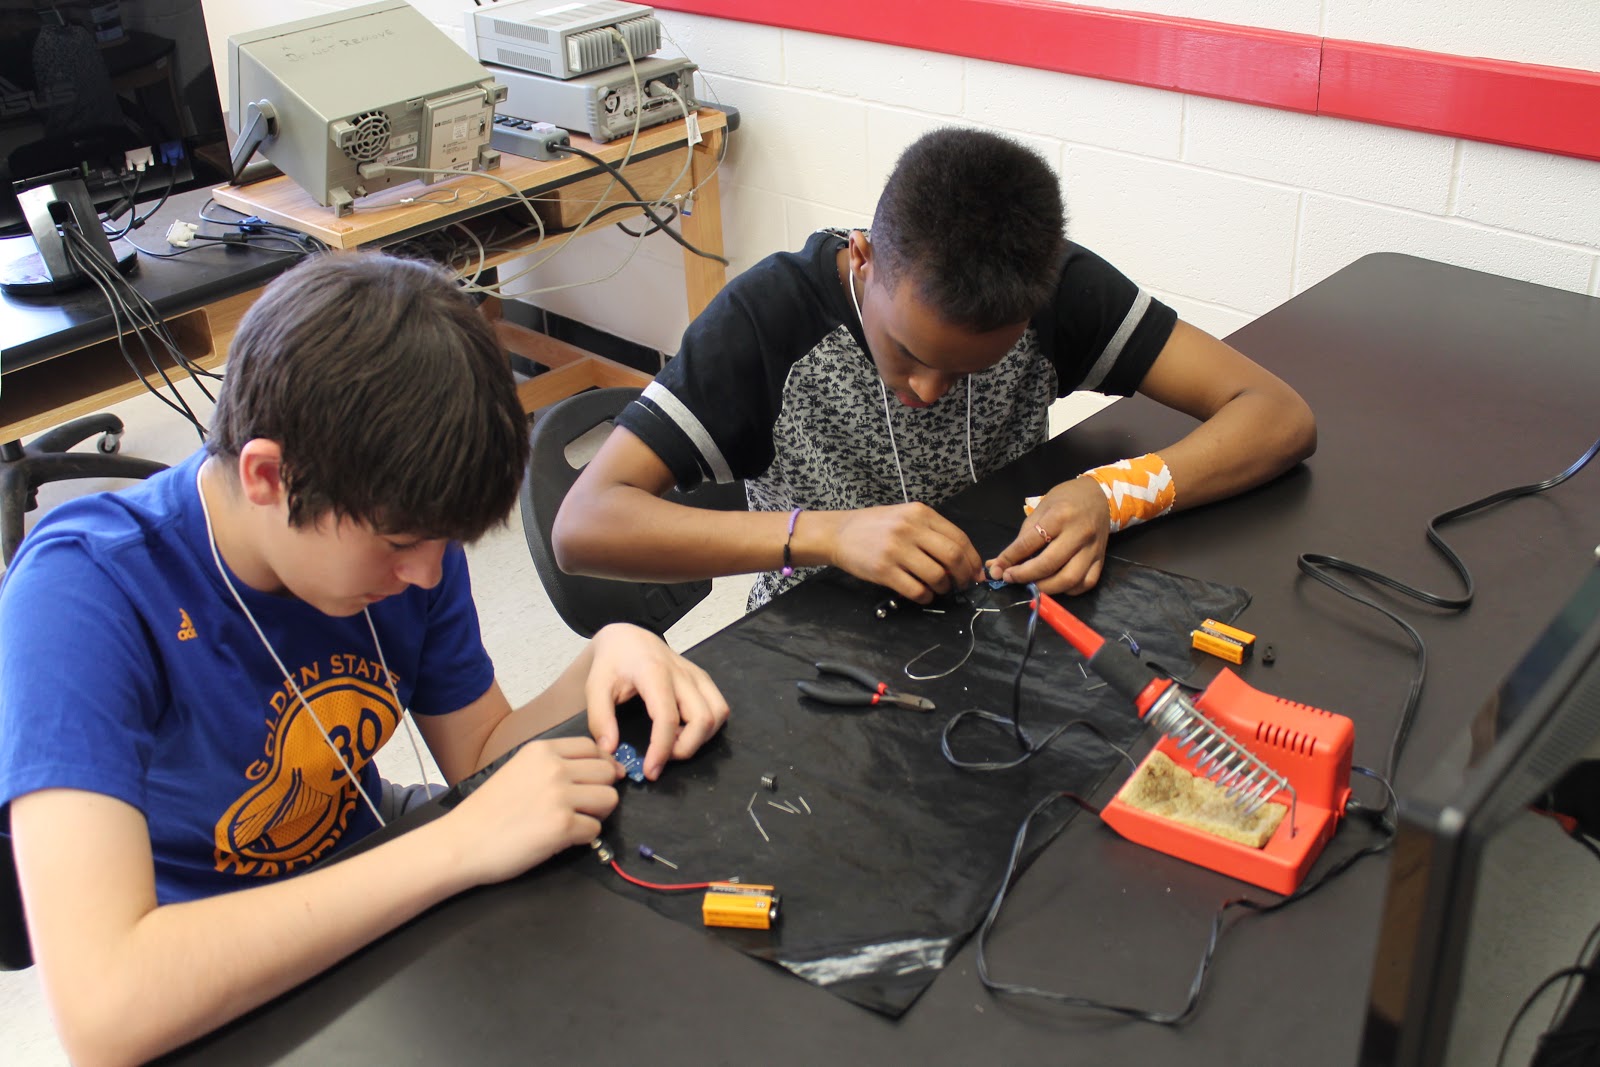 two teenagers building electronics at a table